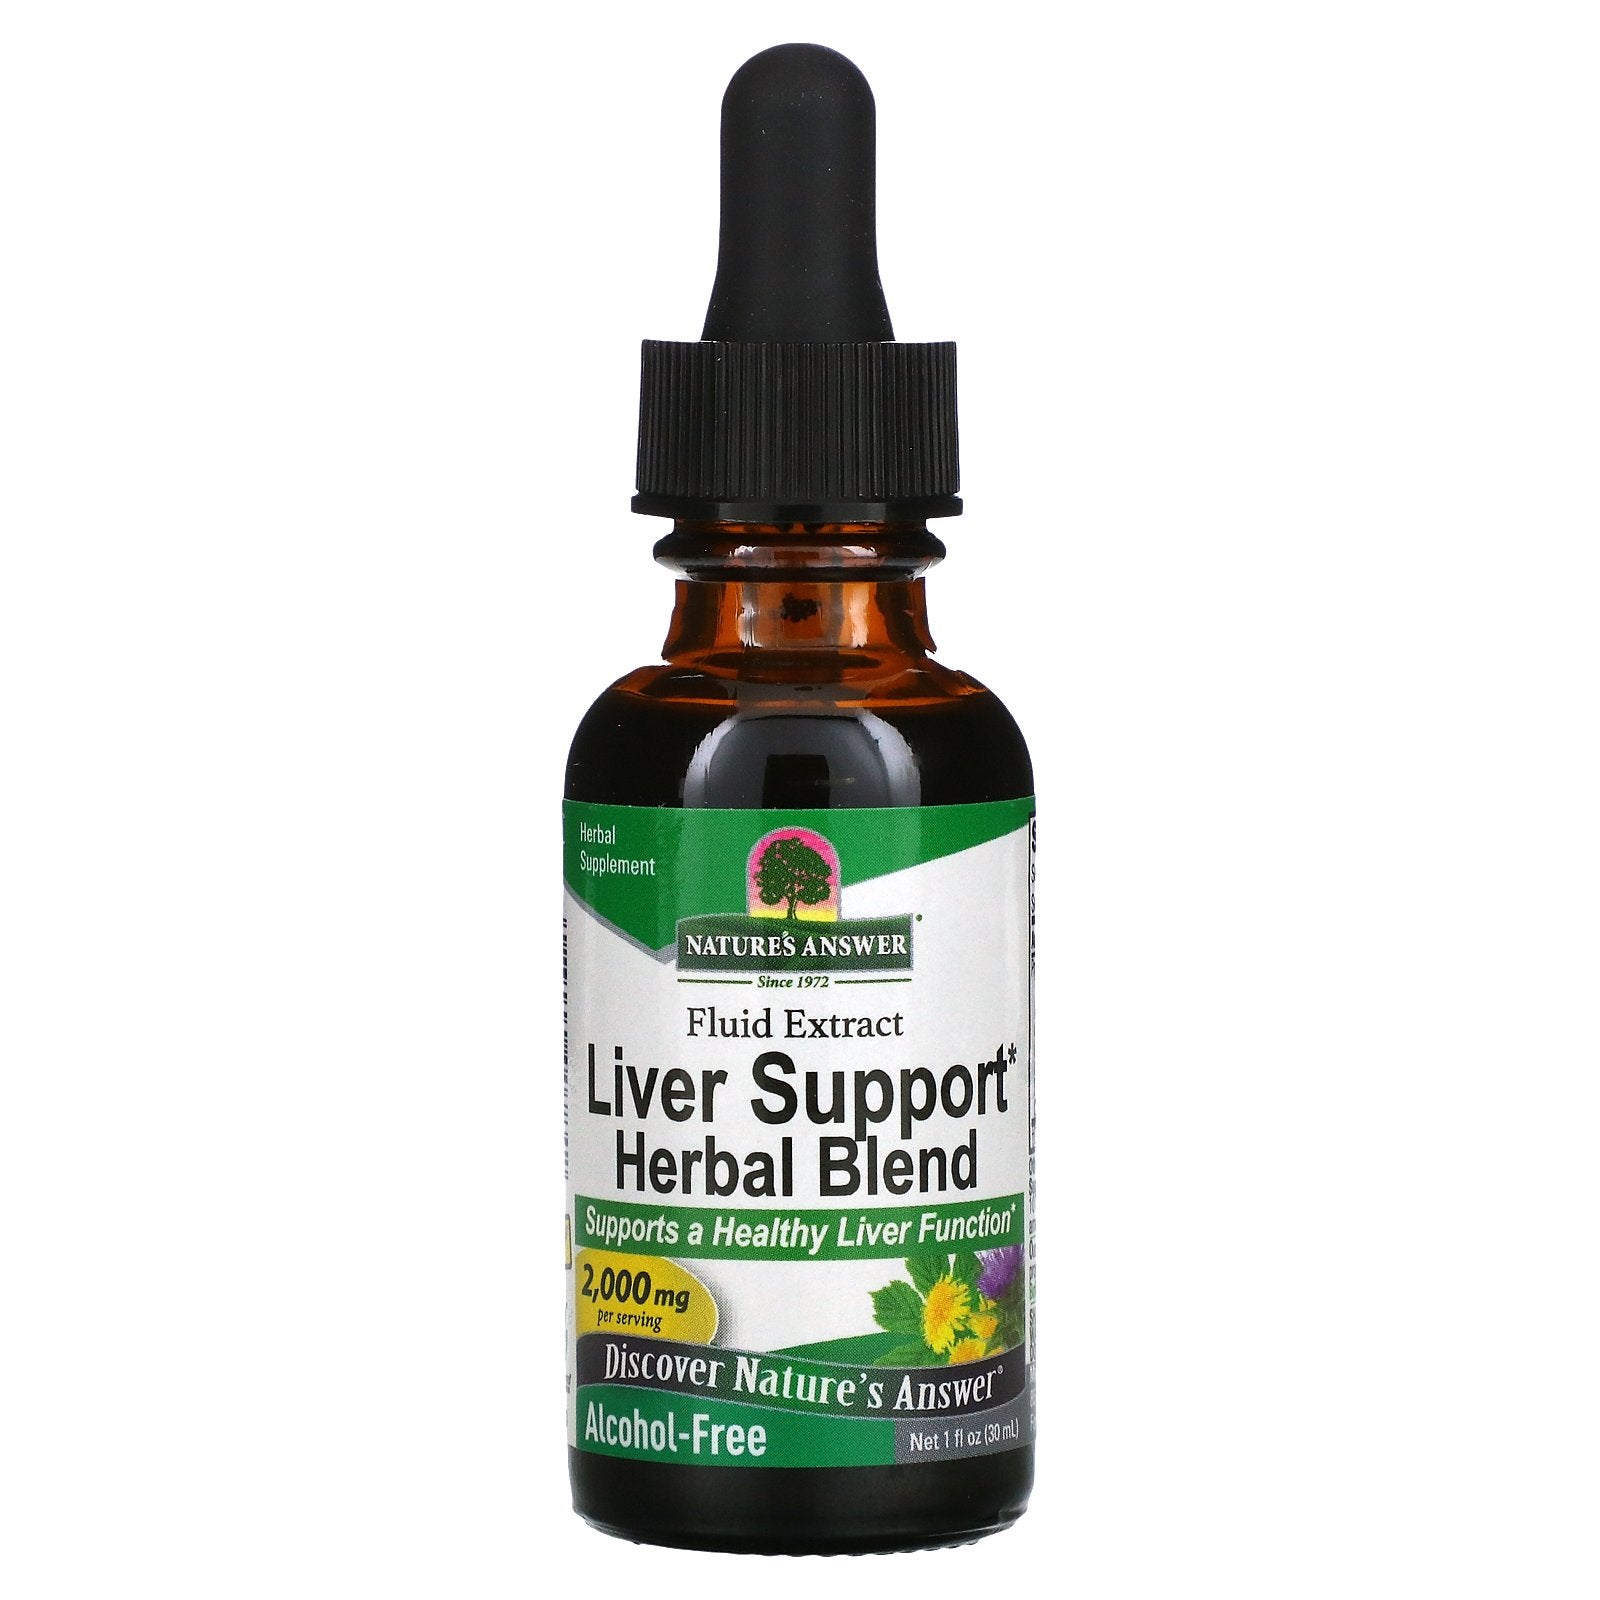 Nature's Answer, Liver Support Herbal Blend, Fluid Extract, Alcohol-Free, 2,000 mg